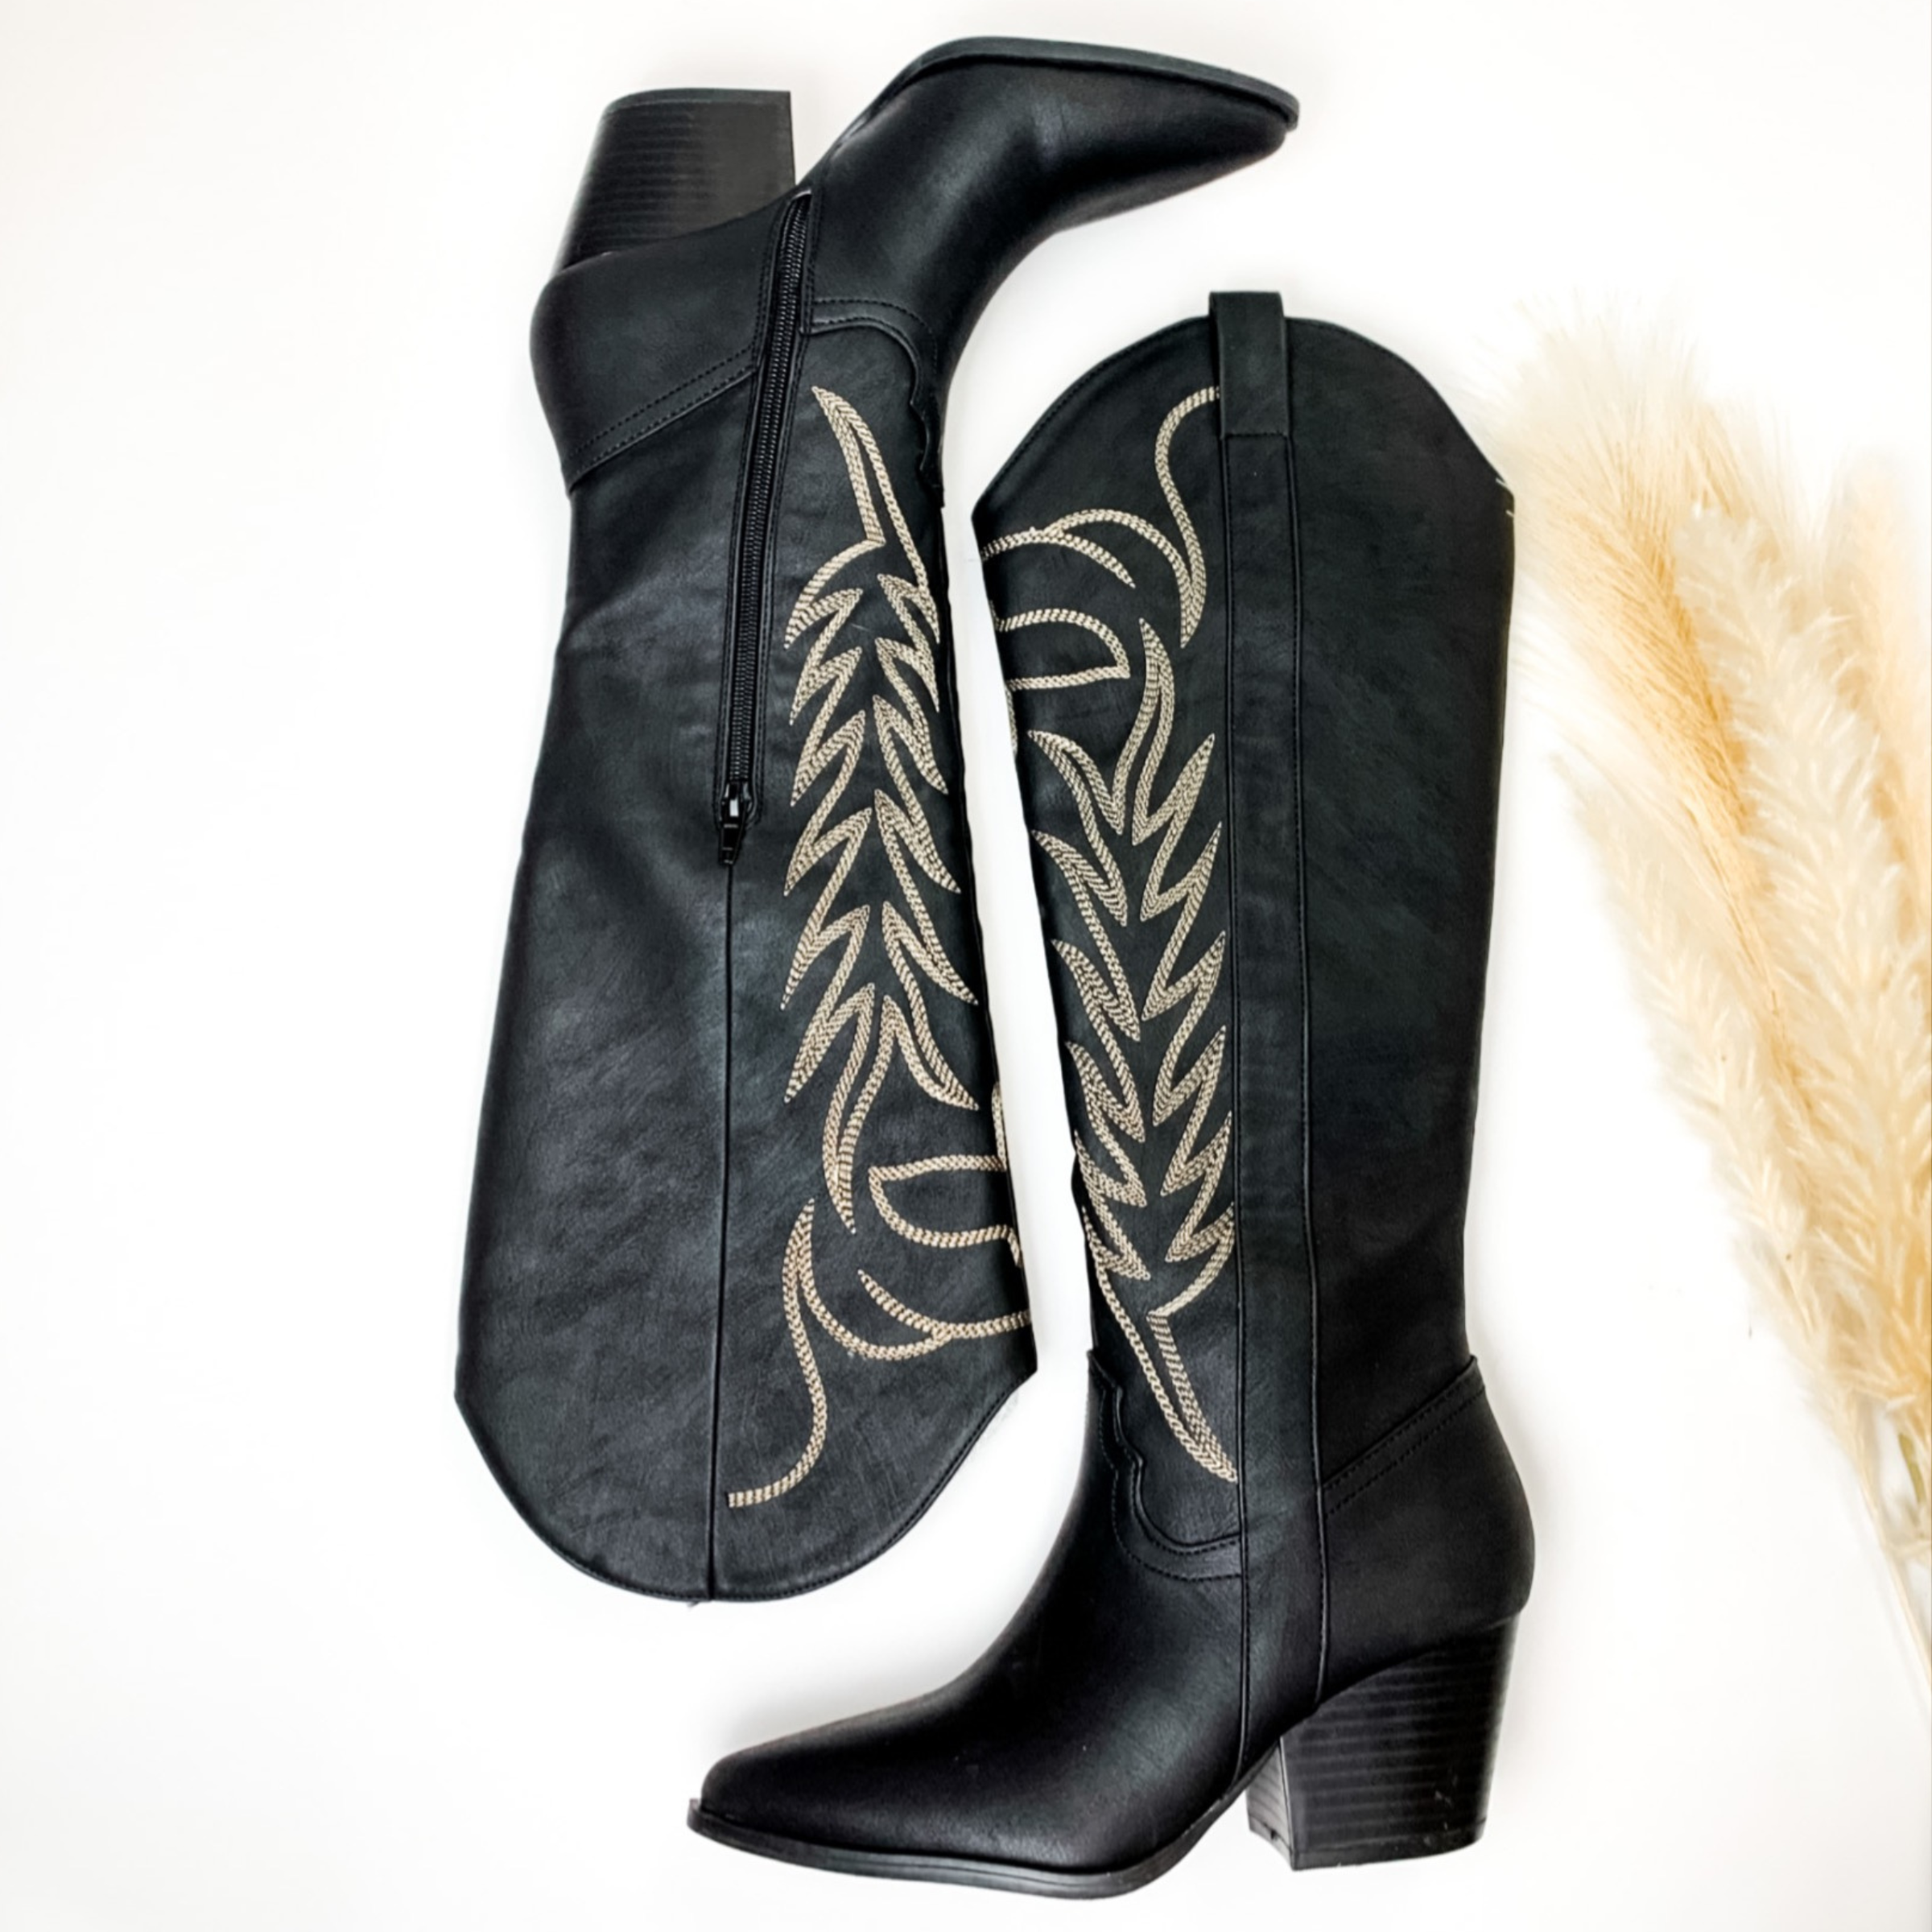 Rodeo Ready Knee High Western Stitch Boots in Black - Giddy Up Glamour Boutique